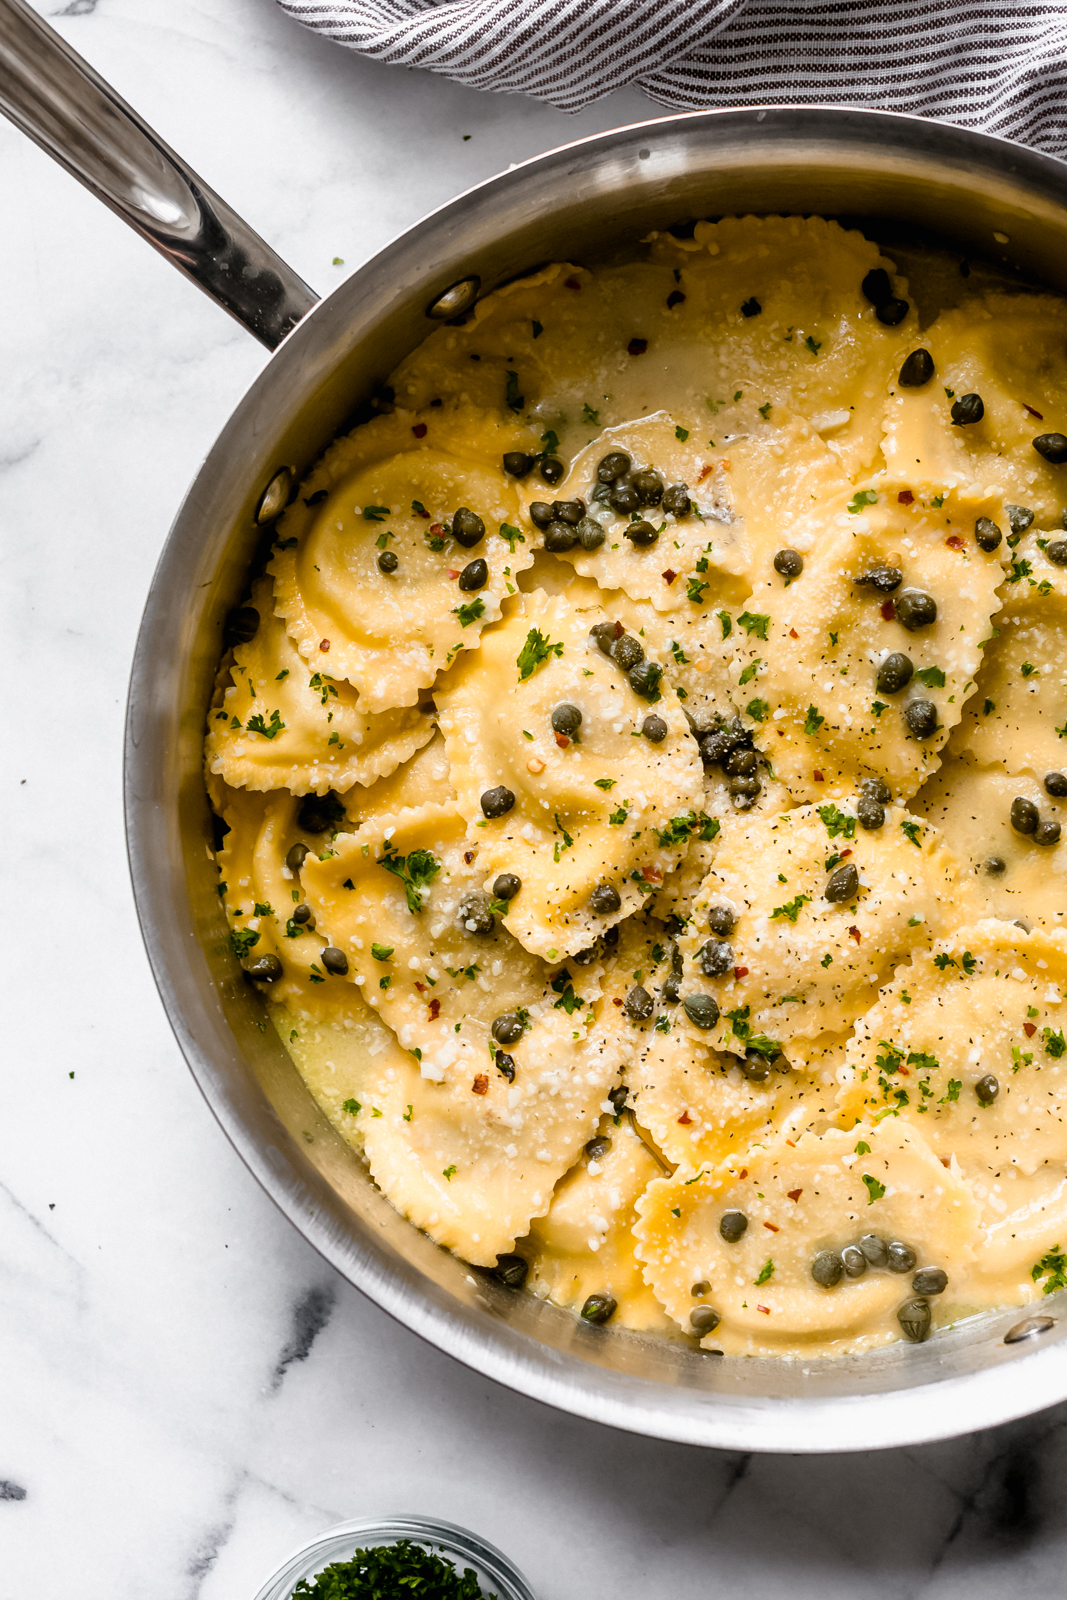 skillet with ravioli in piccata sauce sprinkled with capers